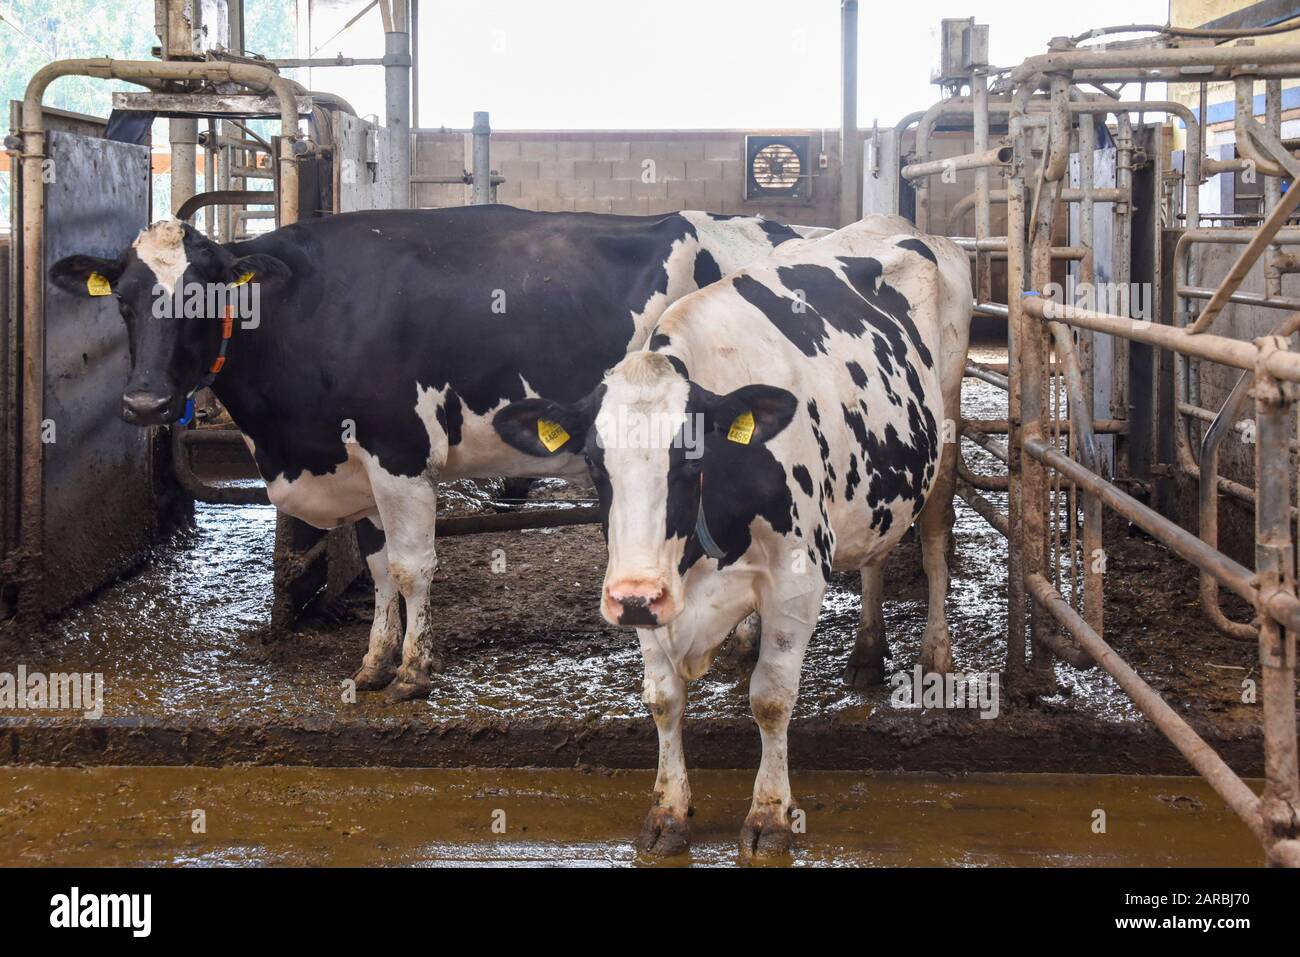 Hamersleben, Germany. 26th Aug, 2019. Two dairy cows stand in the barn of the agricultural cooperative eG Hamersleben. With the help of transponders hanging around their necks, they are guided alternately via sluice gates to the feeding areas, the rest area and the milking robots. Credit: Stephan Schulz/dpa-Zentralbild/ZB/dpa/Alamy Live News Stock Photo